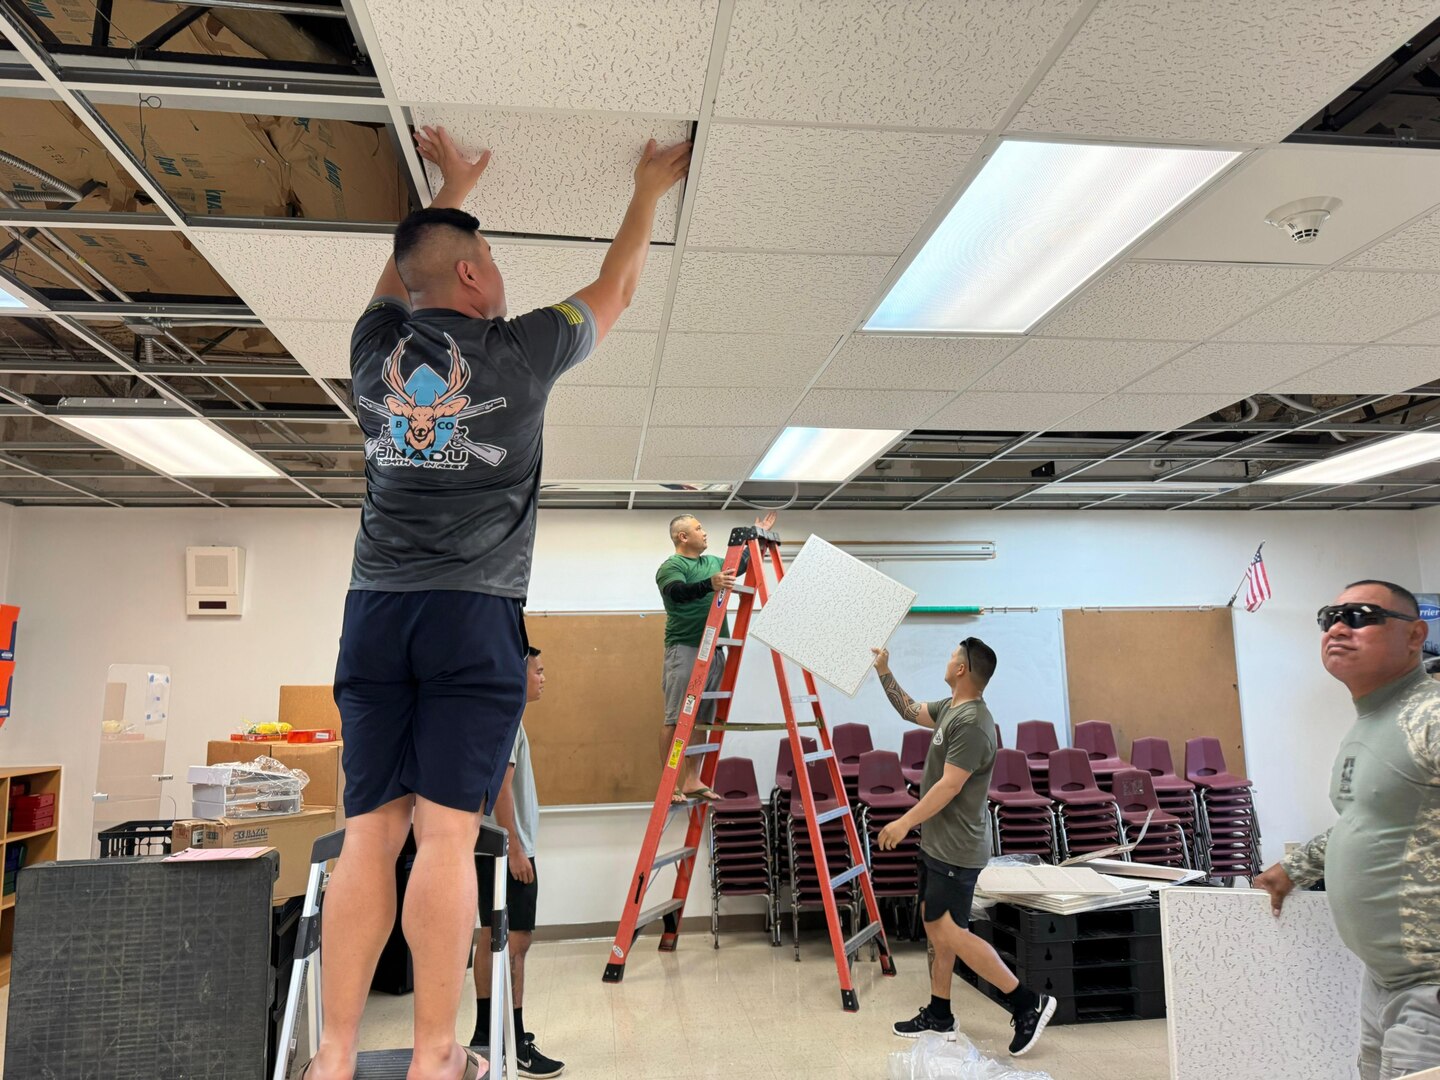 Soldiers from the Guam National Guard’s Bravo Company, 1-294th Infantry Regiment (Chamorri Battalion), activated as Team Binadu under Task Force Talon, helped Adacao Elementary School prepare for inspection Feb. 7, 2024. The school was damaged by Typhoon Mawar almost nine months ago.